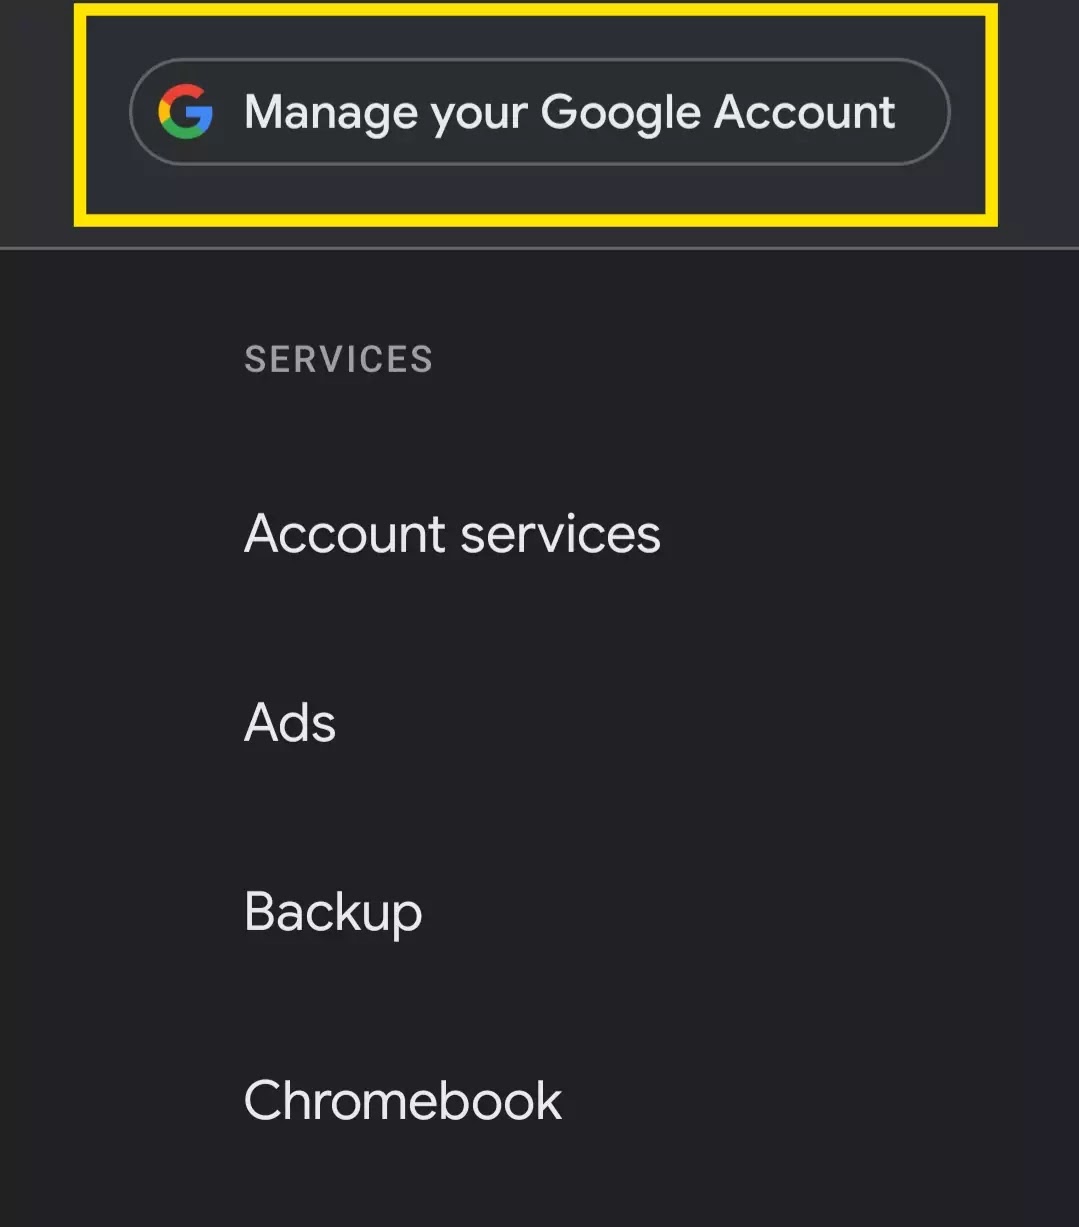 How to delete gmail account